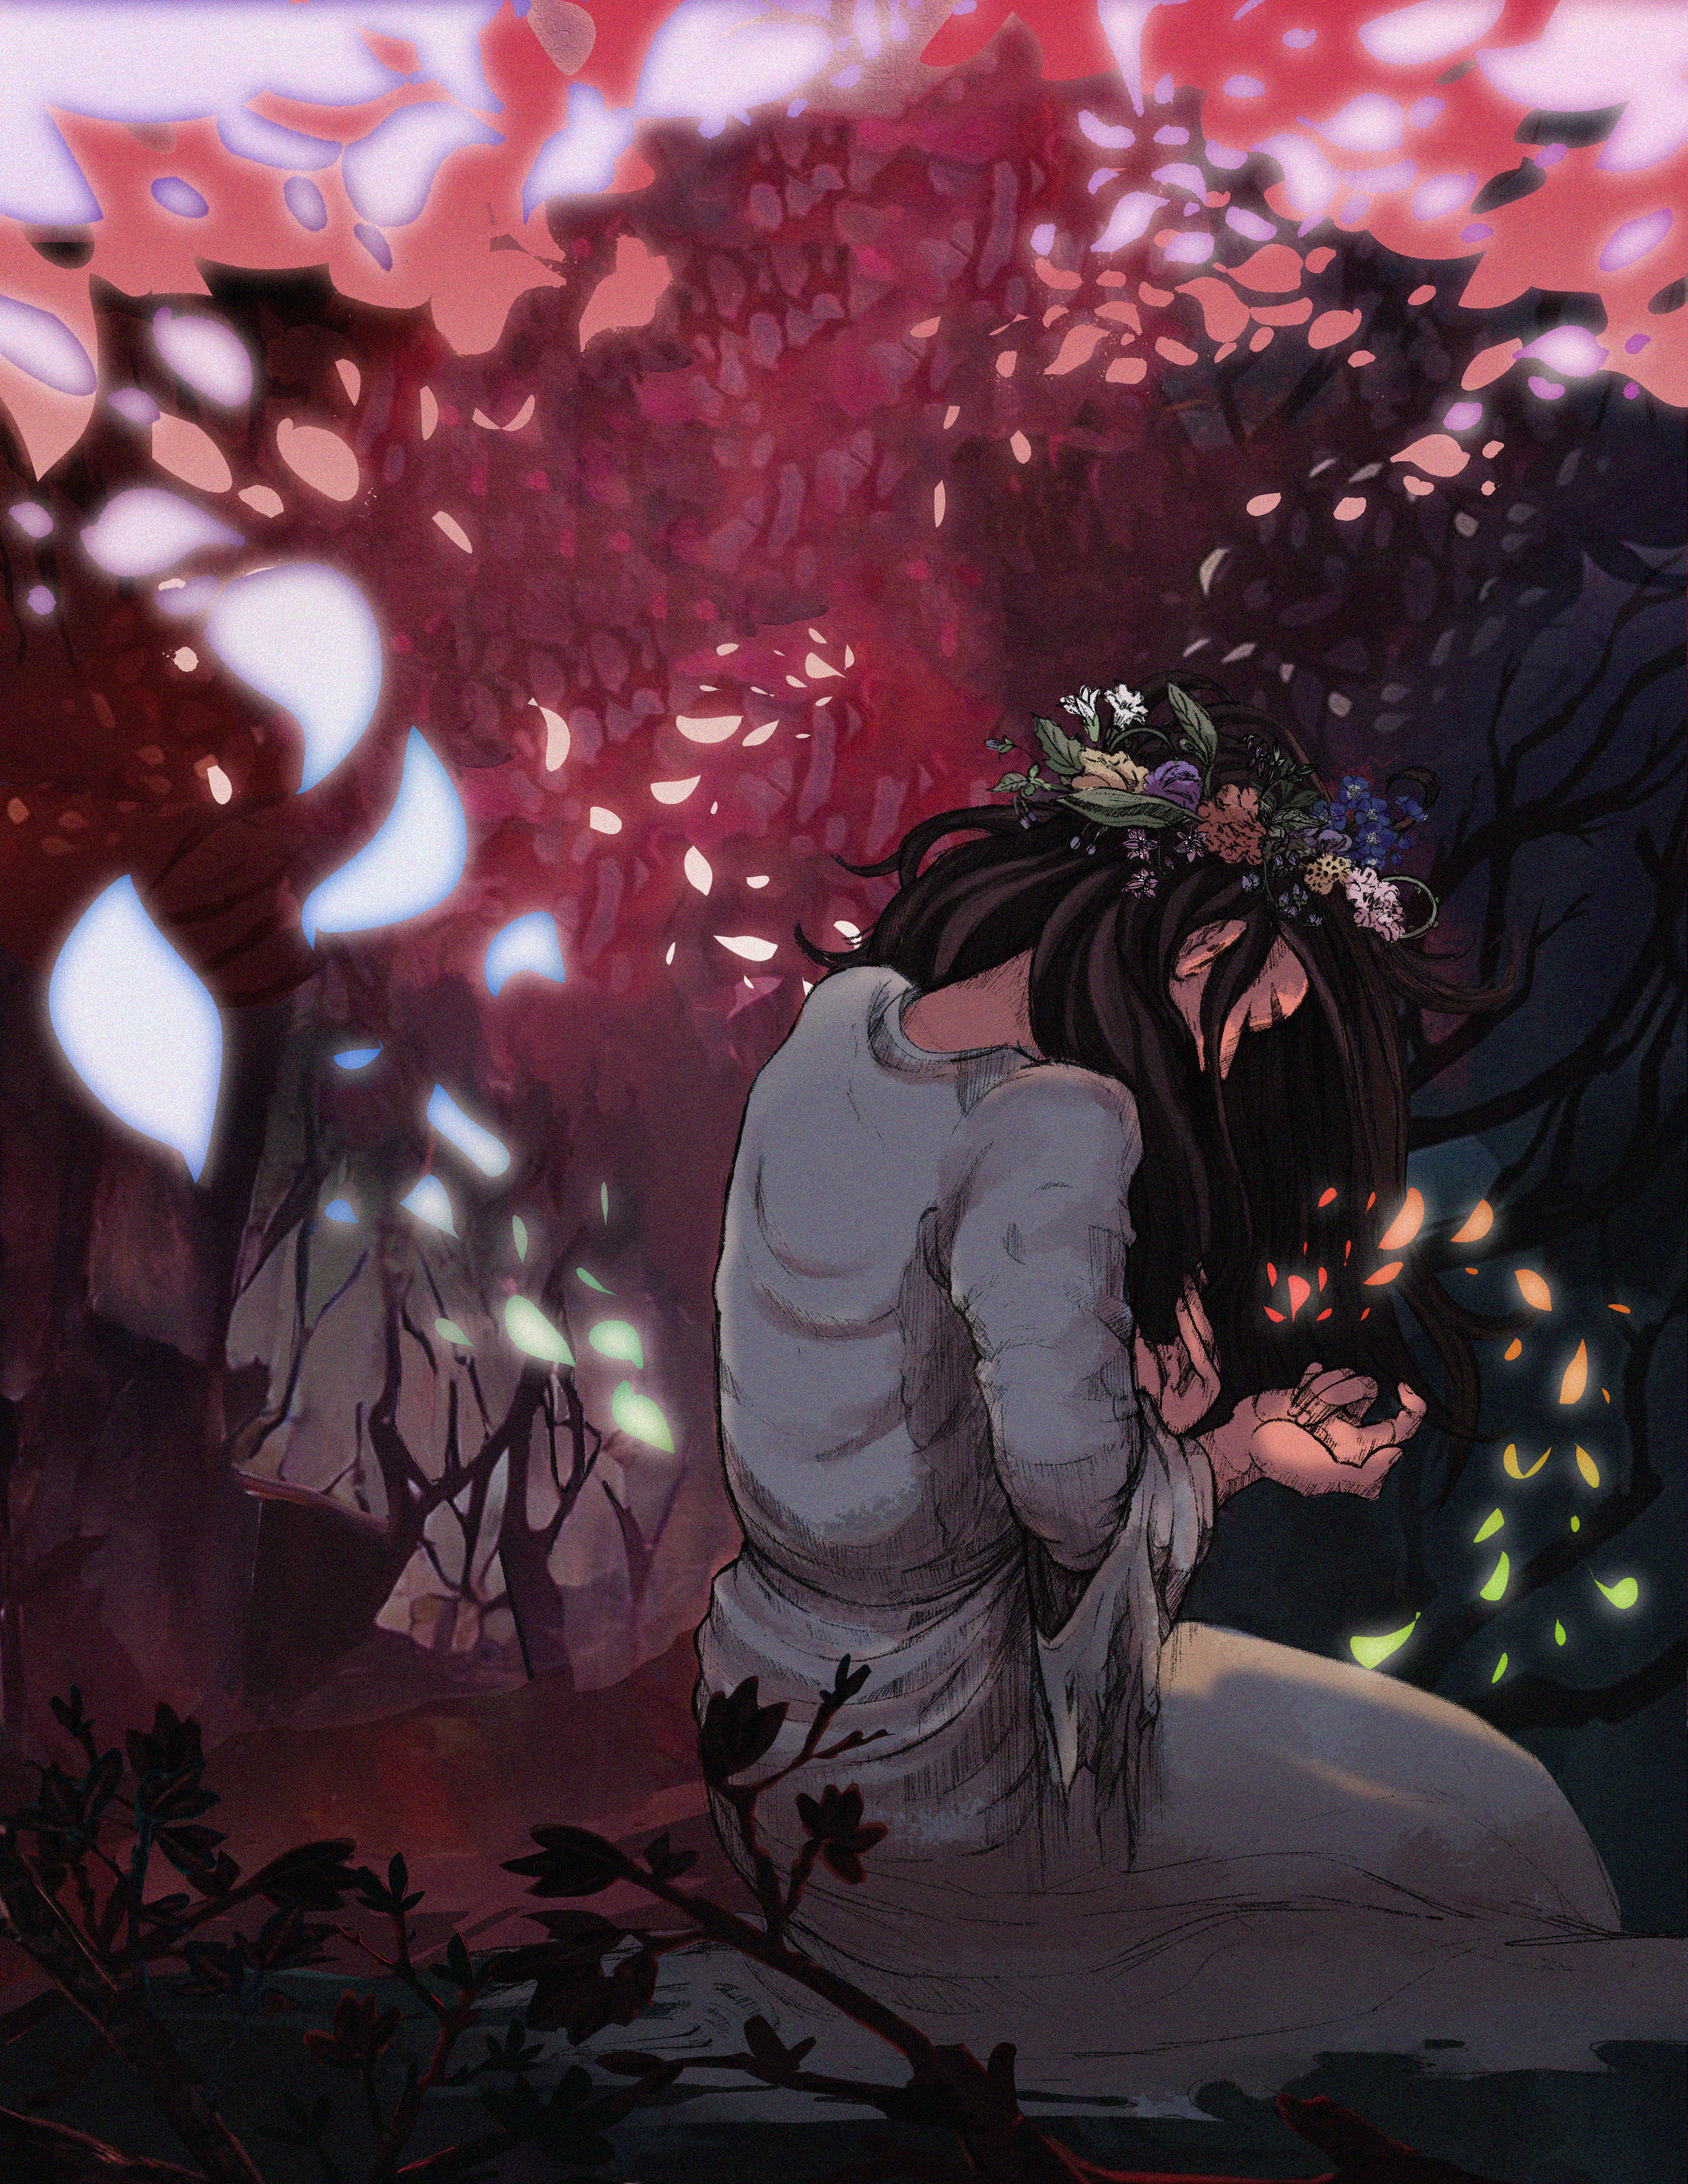 Illustration of a woman on her knees in a dark red and purple forest, wearing a tattered grey dress and a flower crown. She looks down at her hands, which are empty but appear to be clutching at multicoloured petals that swirl around her into the background.